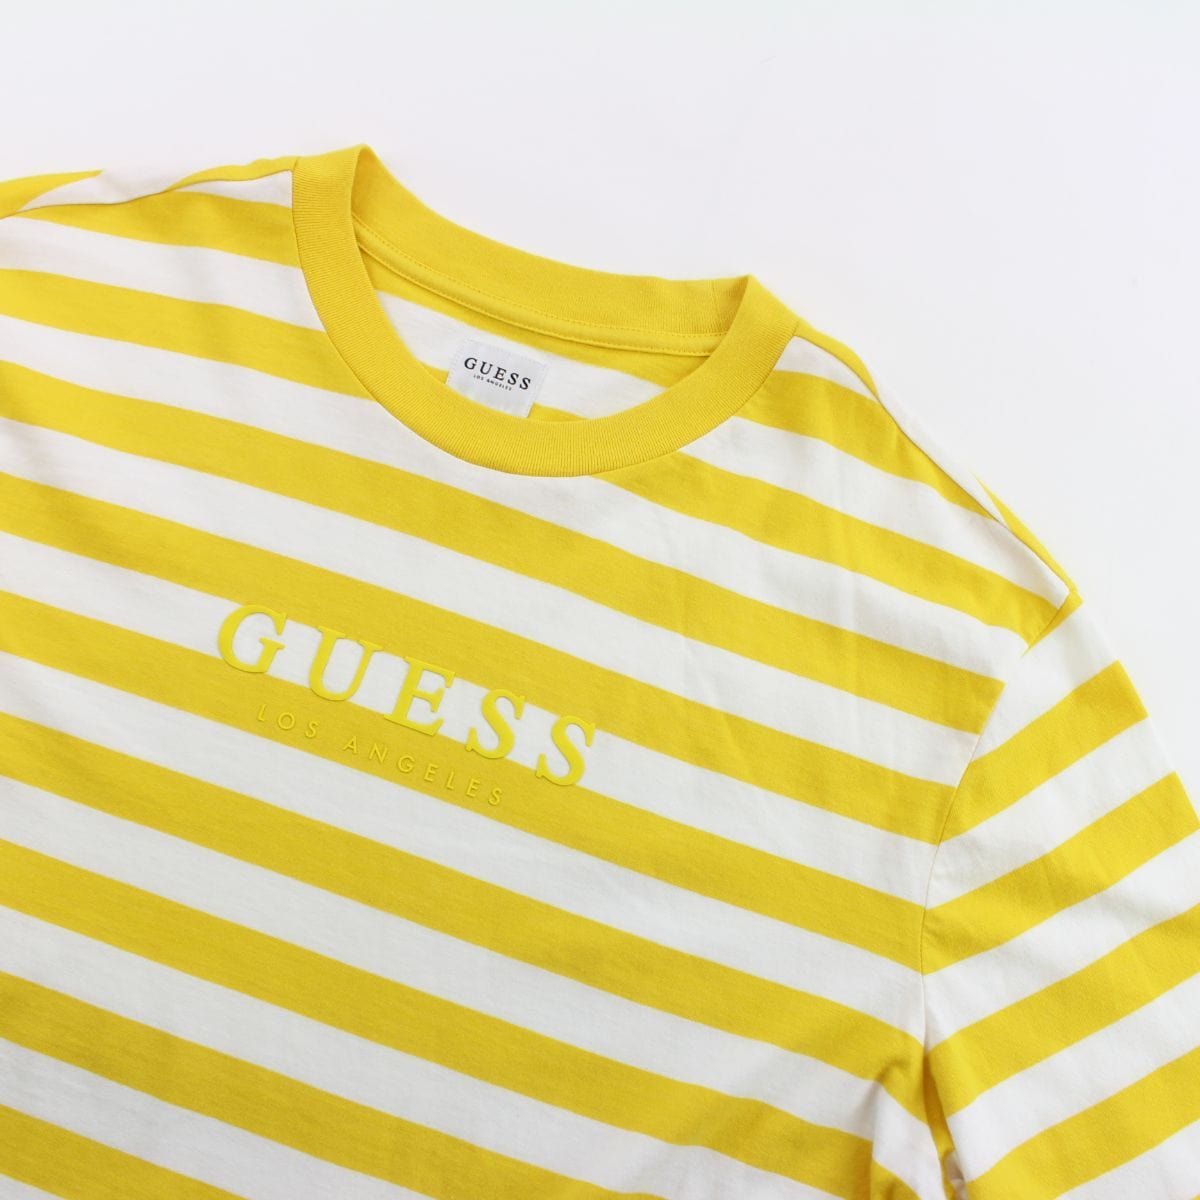 guess yellow and white striped shirt